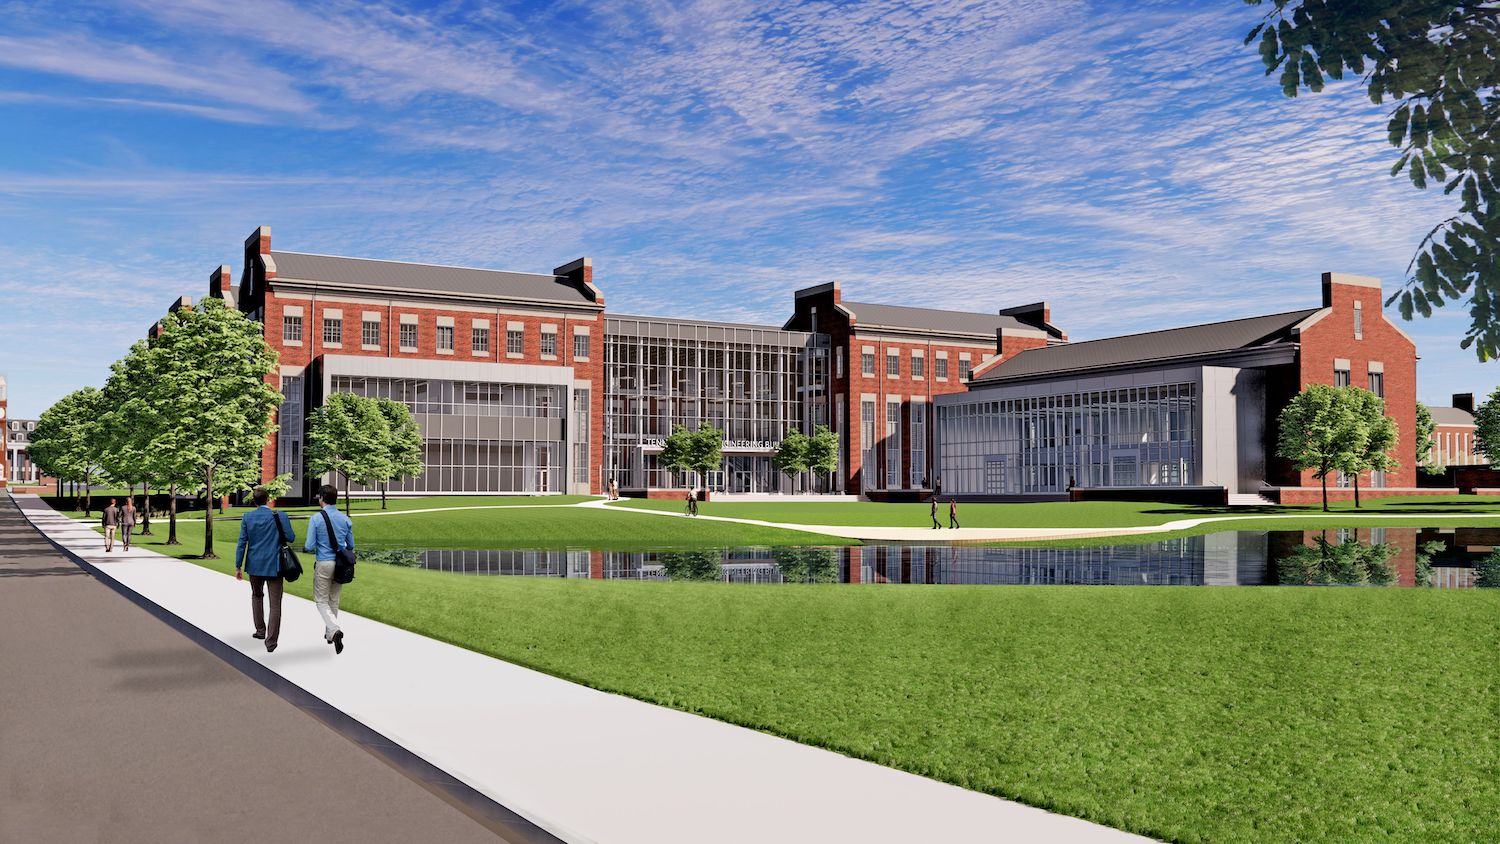 Rednering of plans for the university's new engineering building